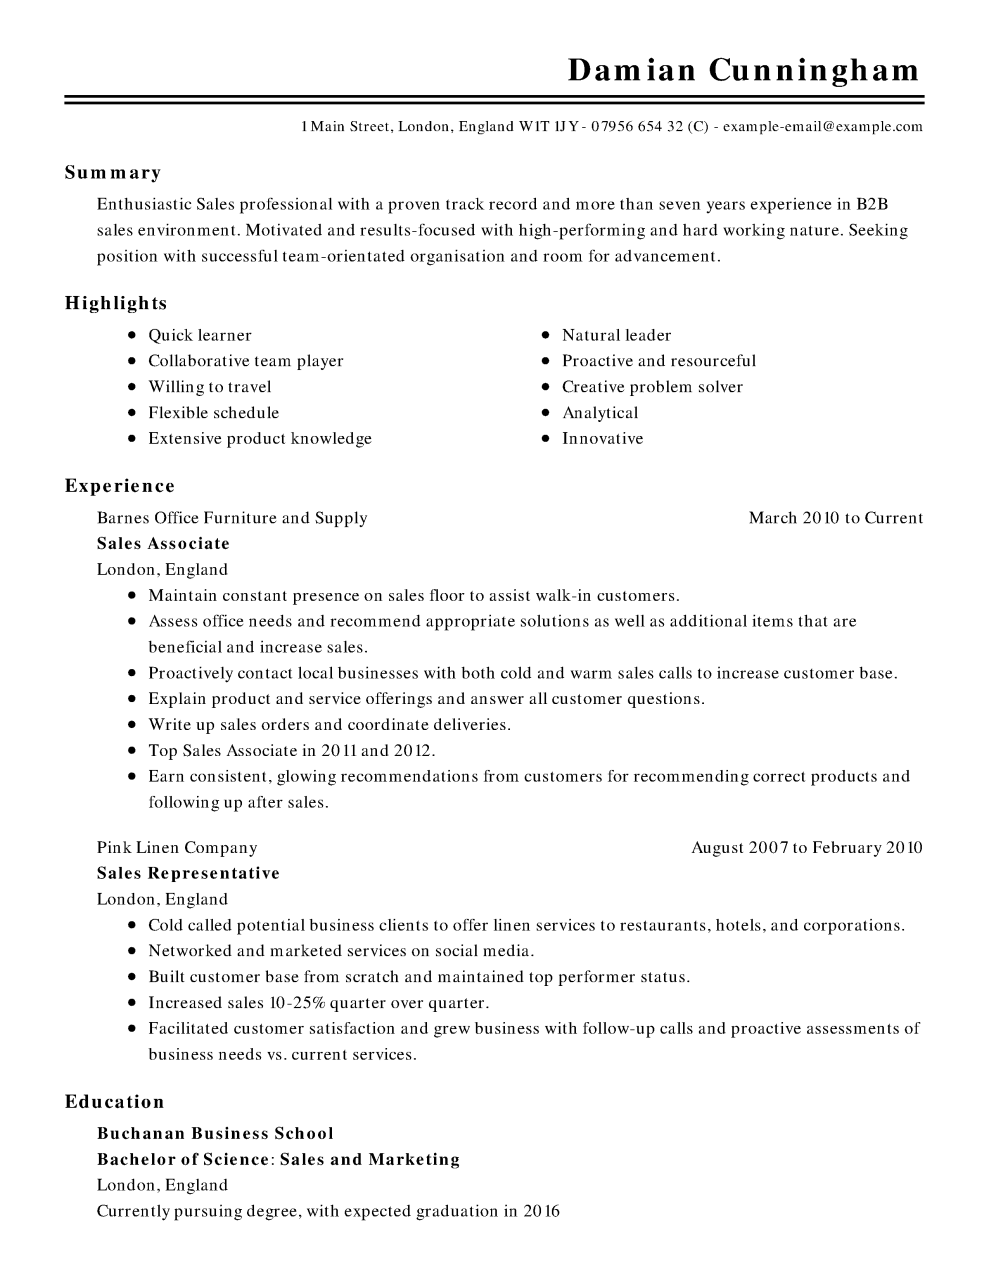 Masters Degree On Resume Examples of Career Objective